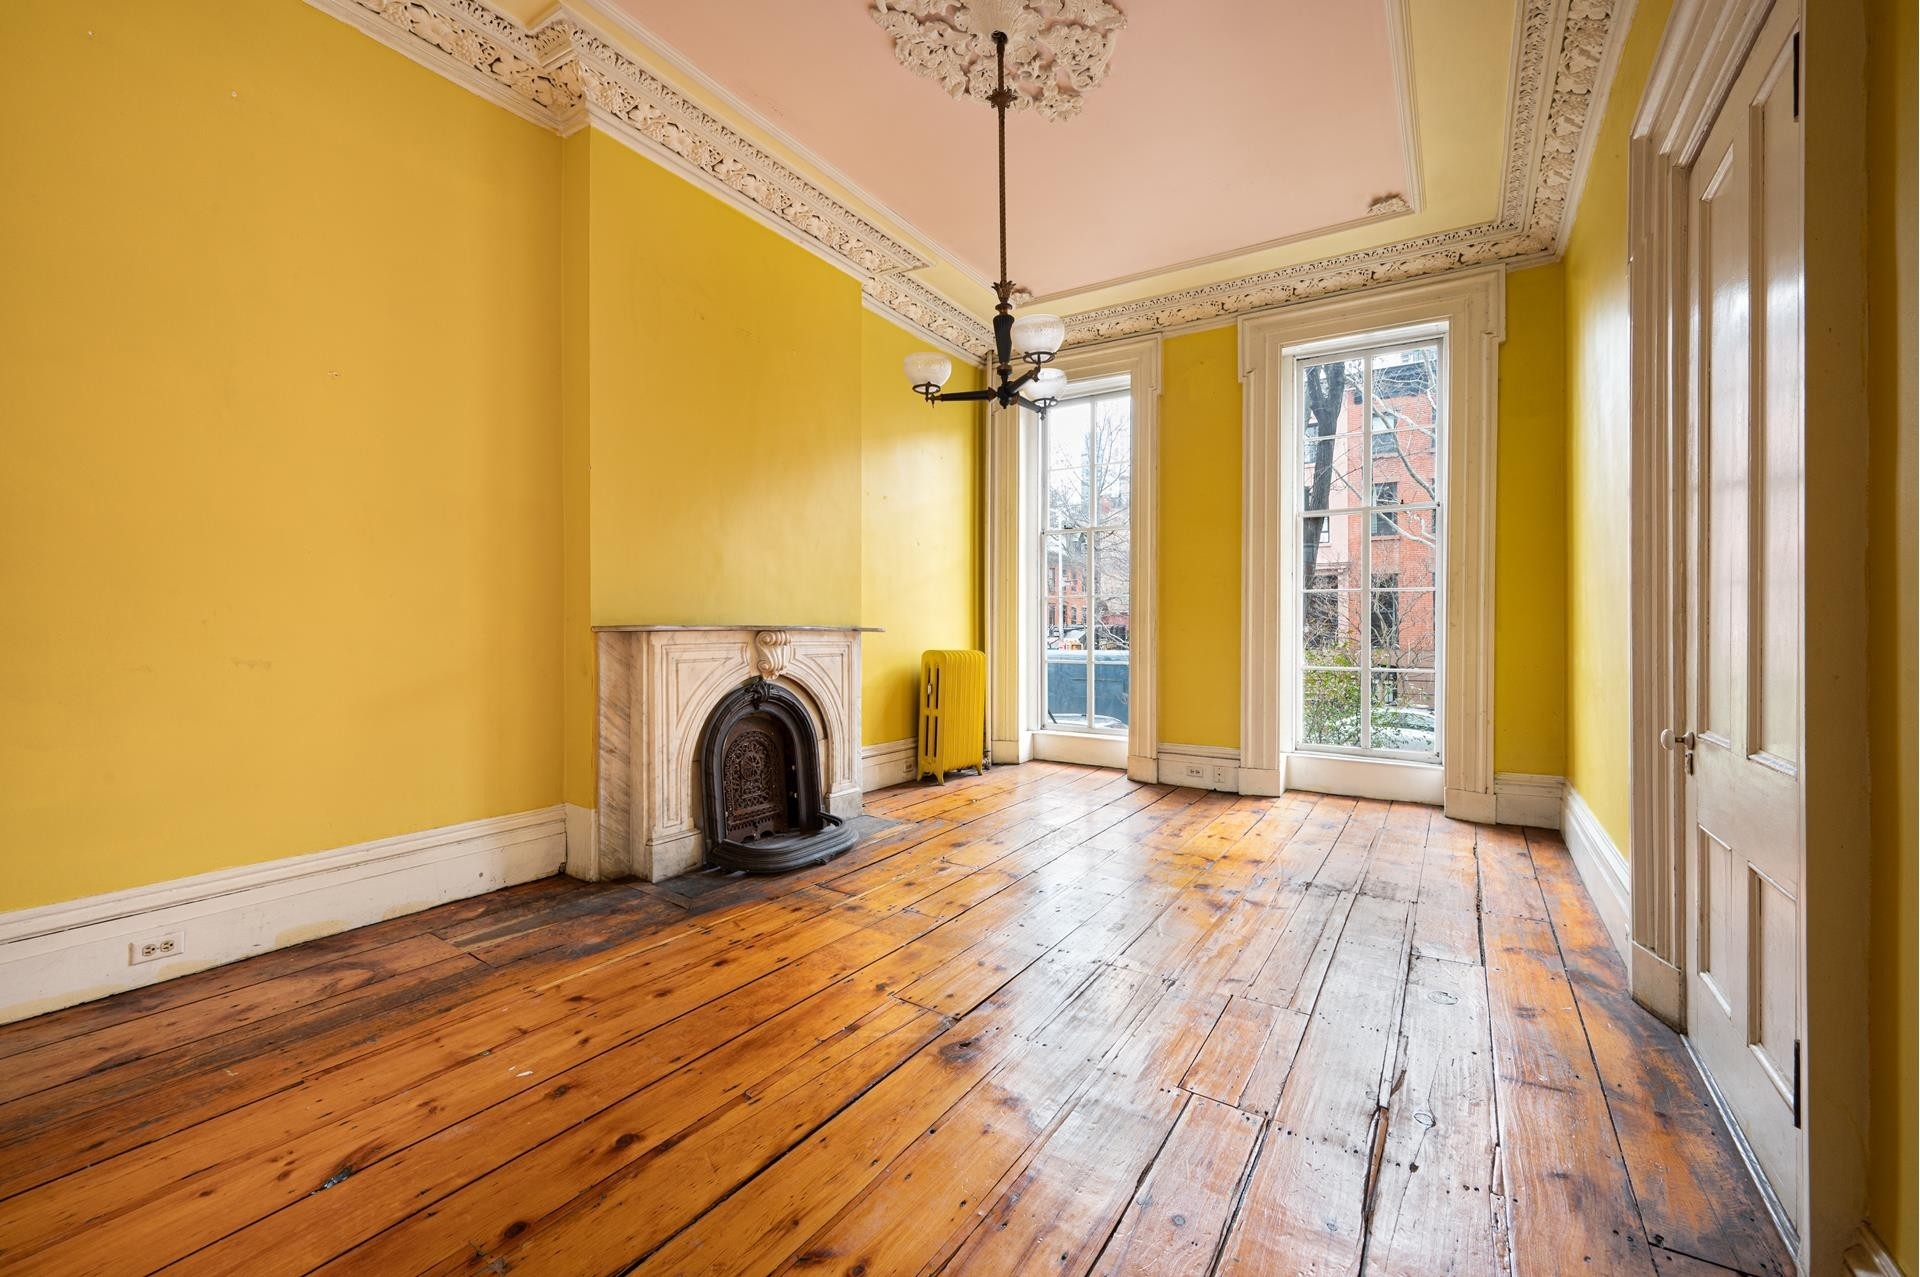 3. Single Family Townhouse for Sale at 194 DEAN ST, TOWNHOUSE Boerum Hill, Brooklyn, New York 11217